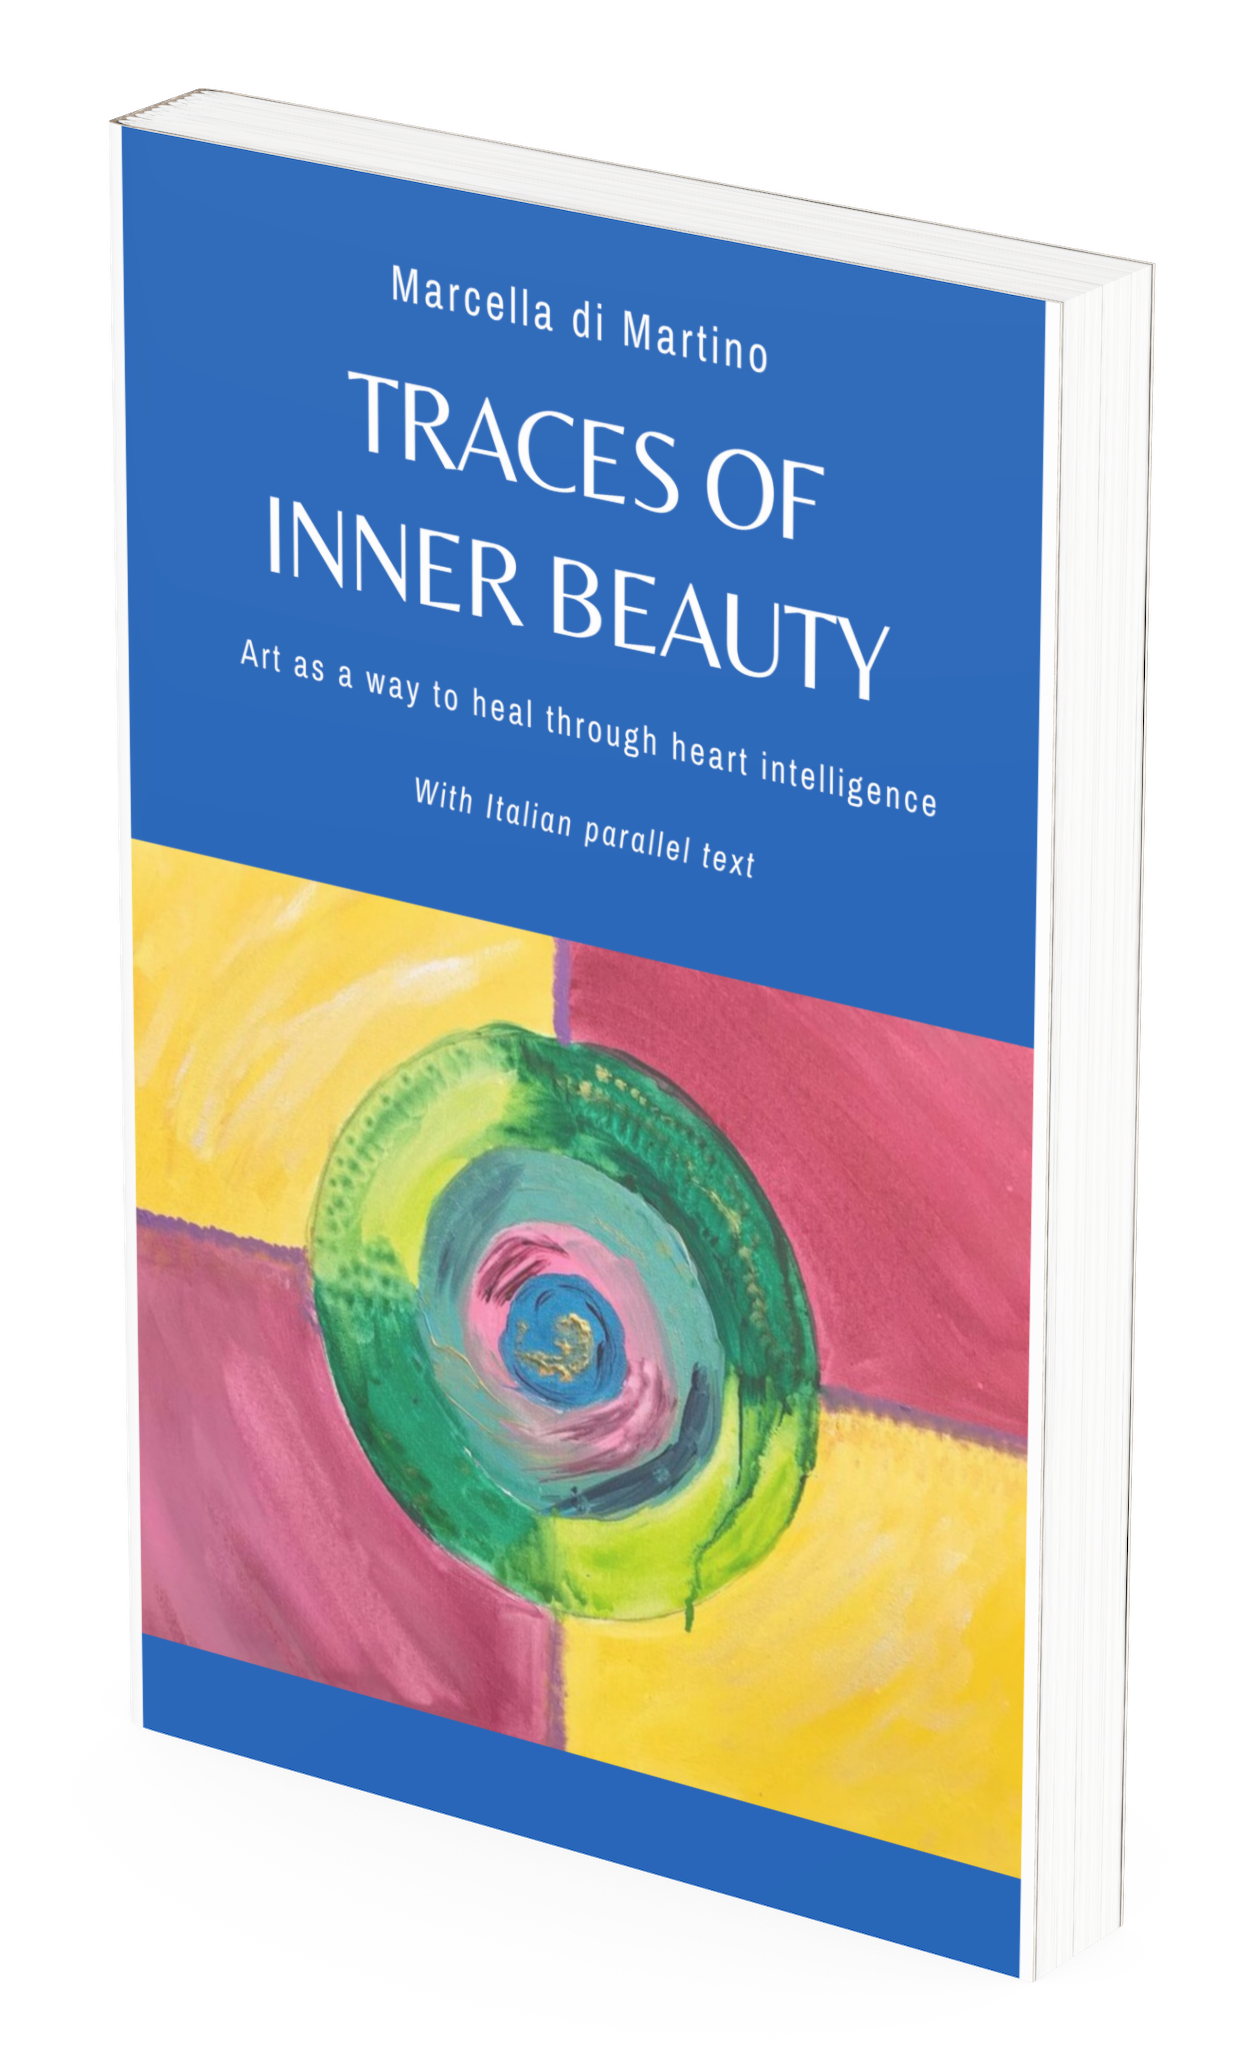 Traces of inner beauty